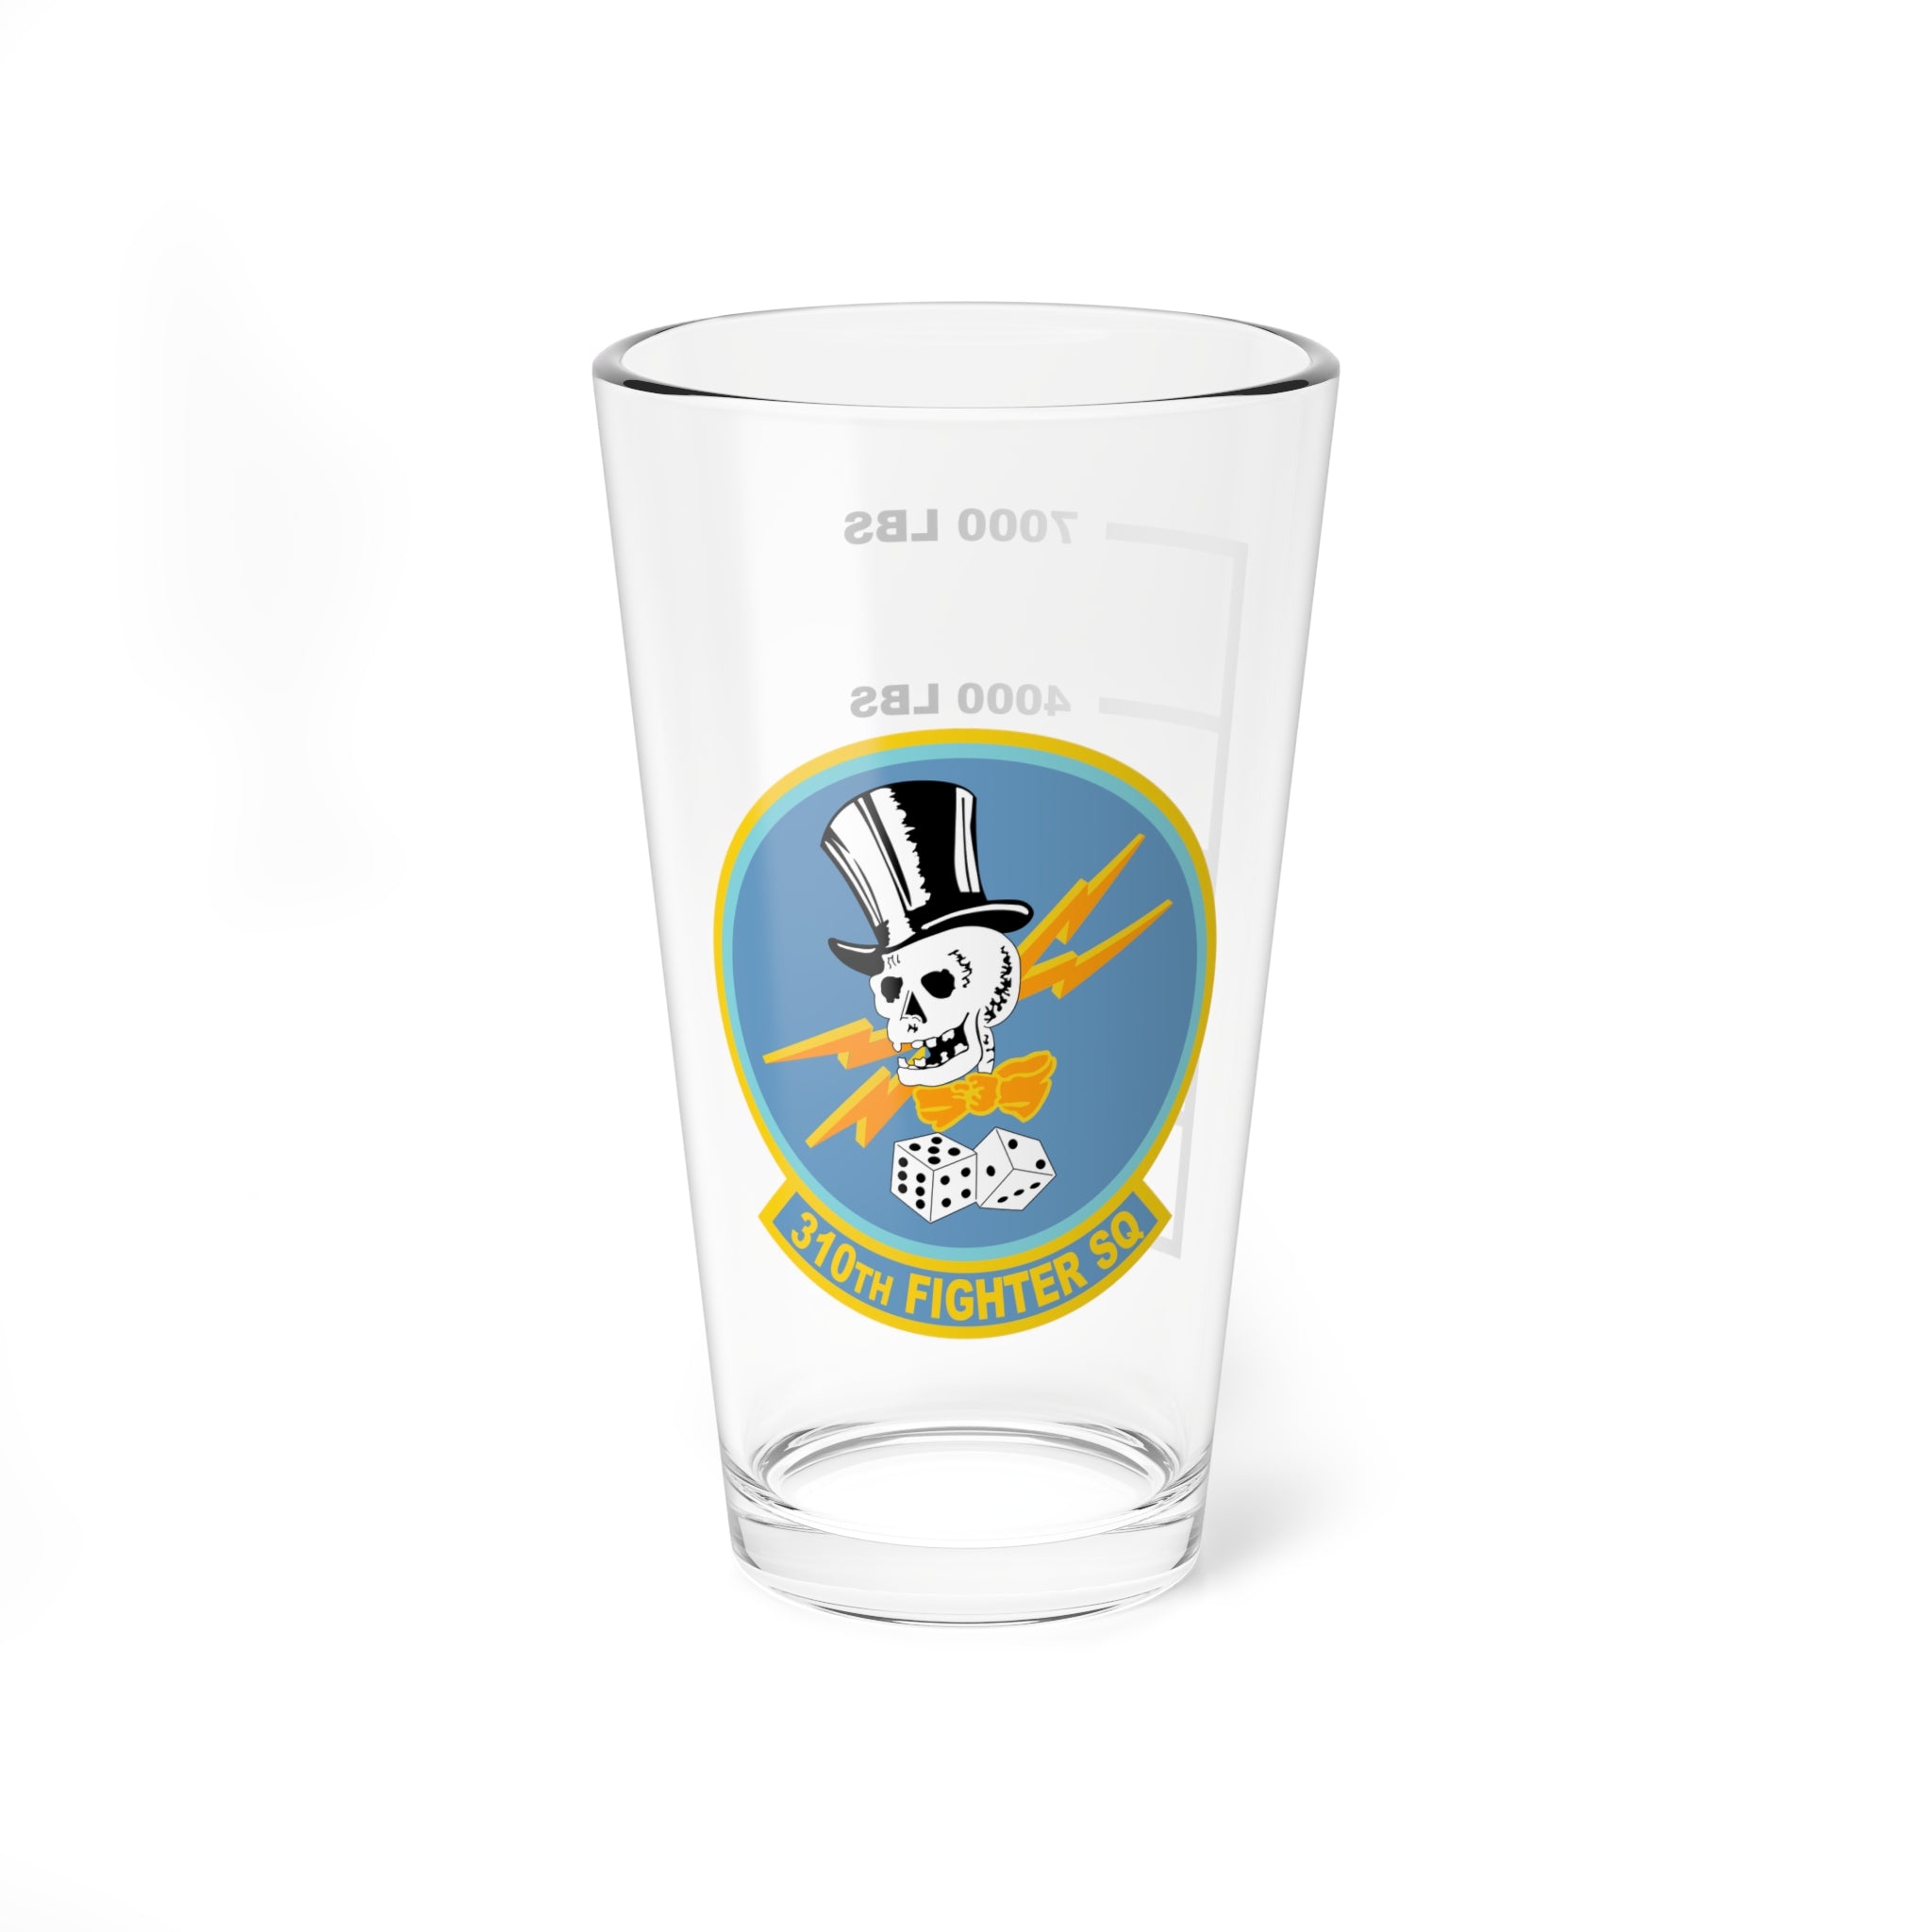 310th Fighter Squadron Fuel Low Pint Glass, USAF Fighter Squadron flying the F-16 Viper (Fighting Falcon)